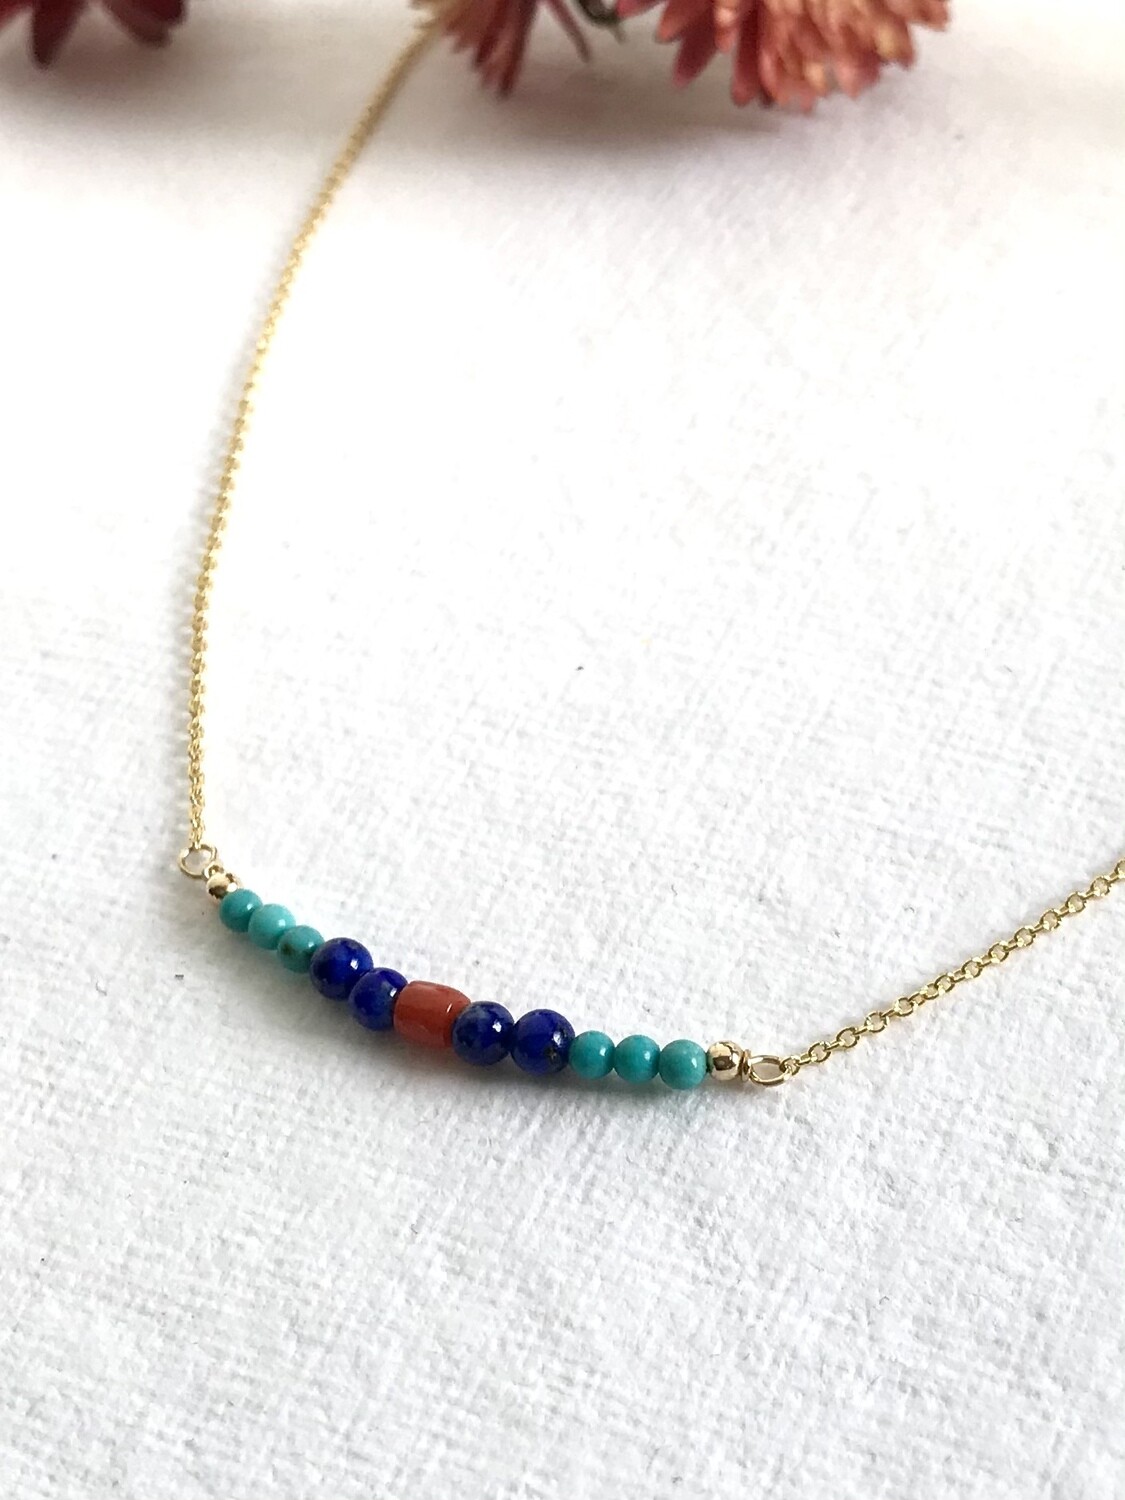 Turquoise, Lapis & Coral Artemis Necklace - GDFDSN5